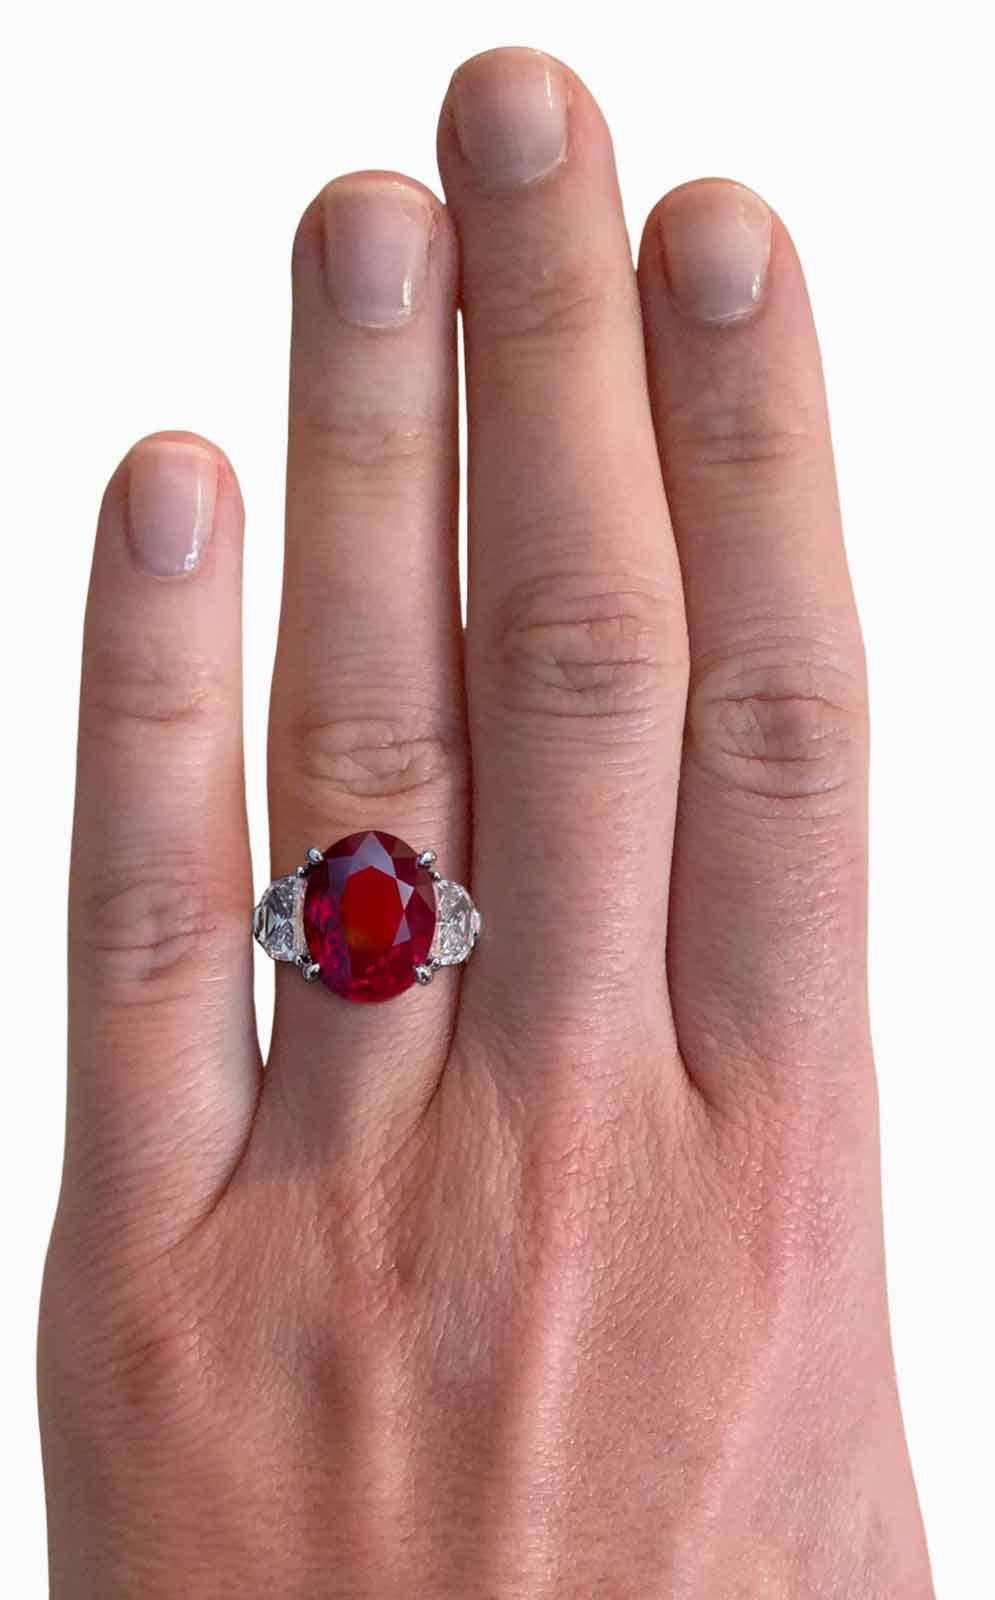 3.40 GIA certified oval cut ruby is completely unheated and displays striking, vibrant red color! The ruby is certified by GIA, the premier gemological authority. GIA determined the ruby to be unheated and completely natural earth mined. The vast